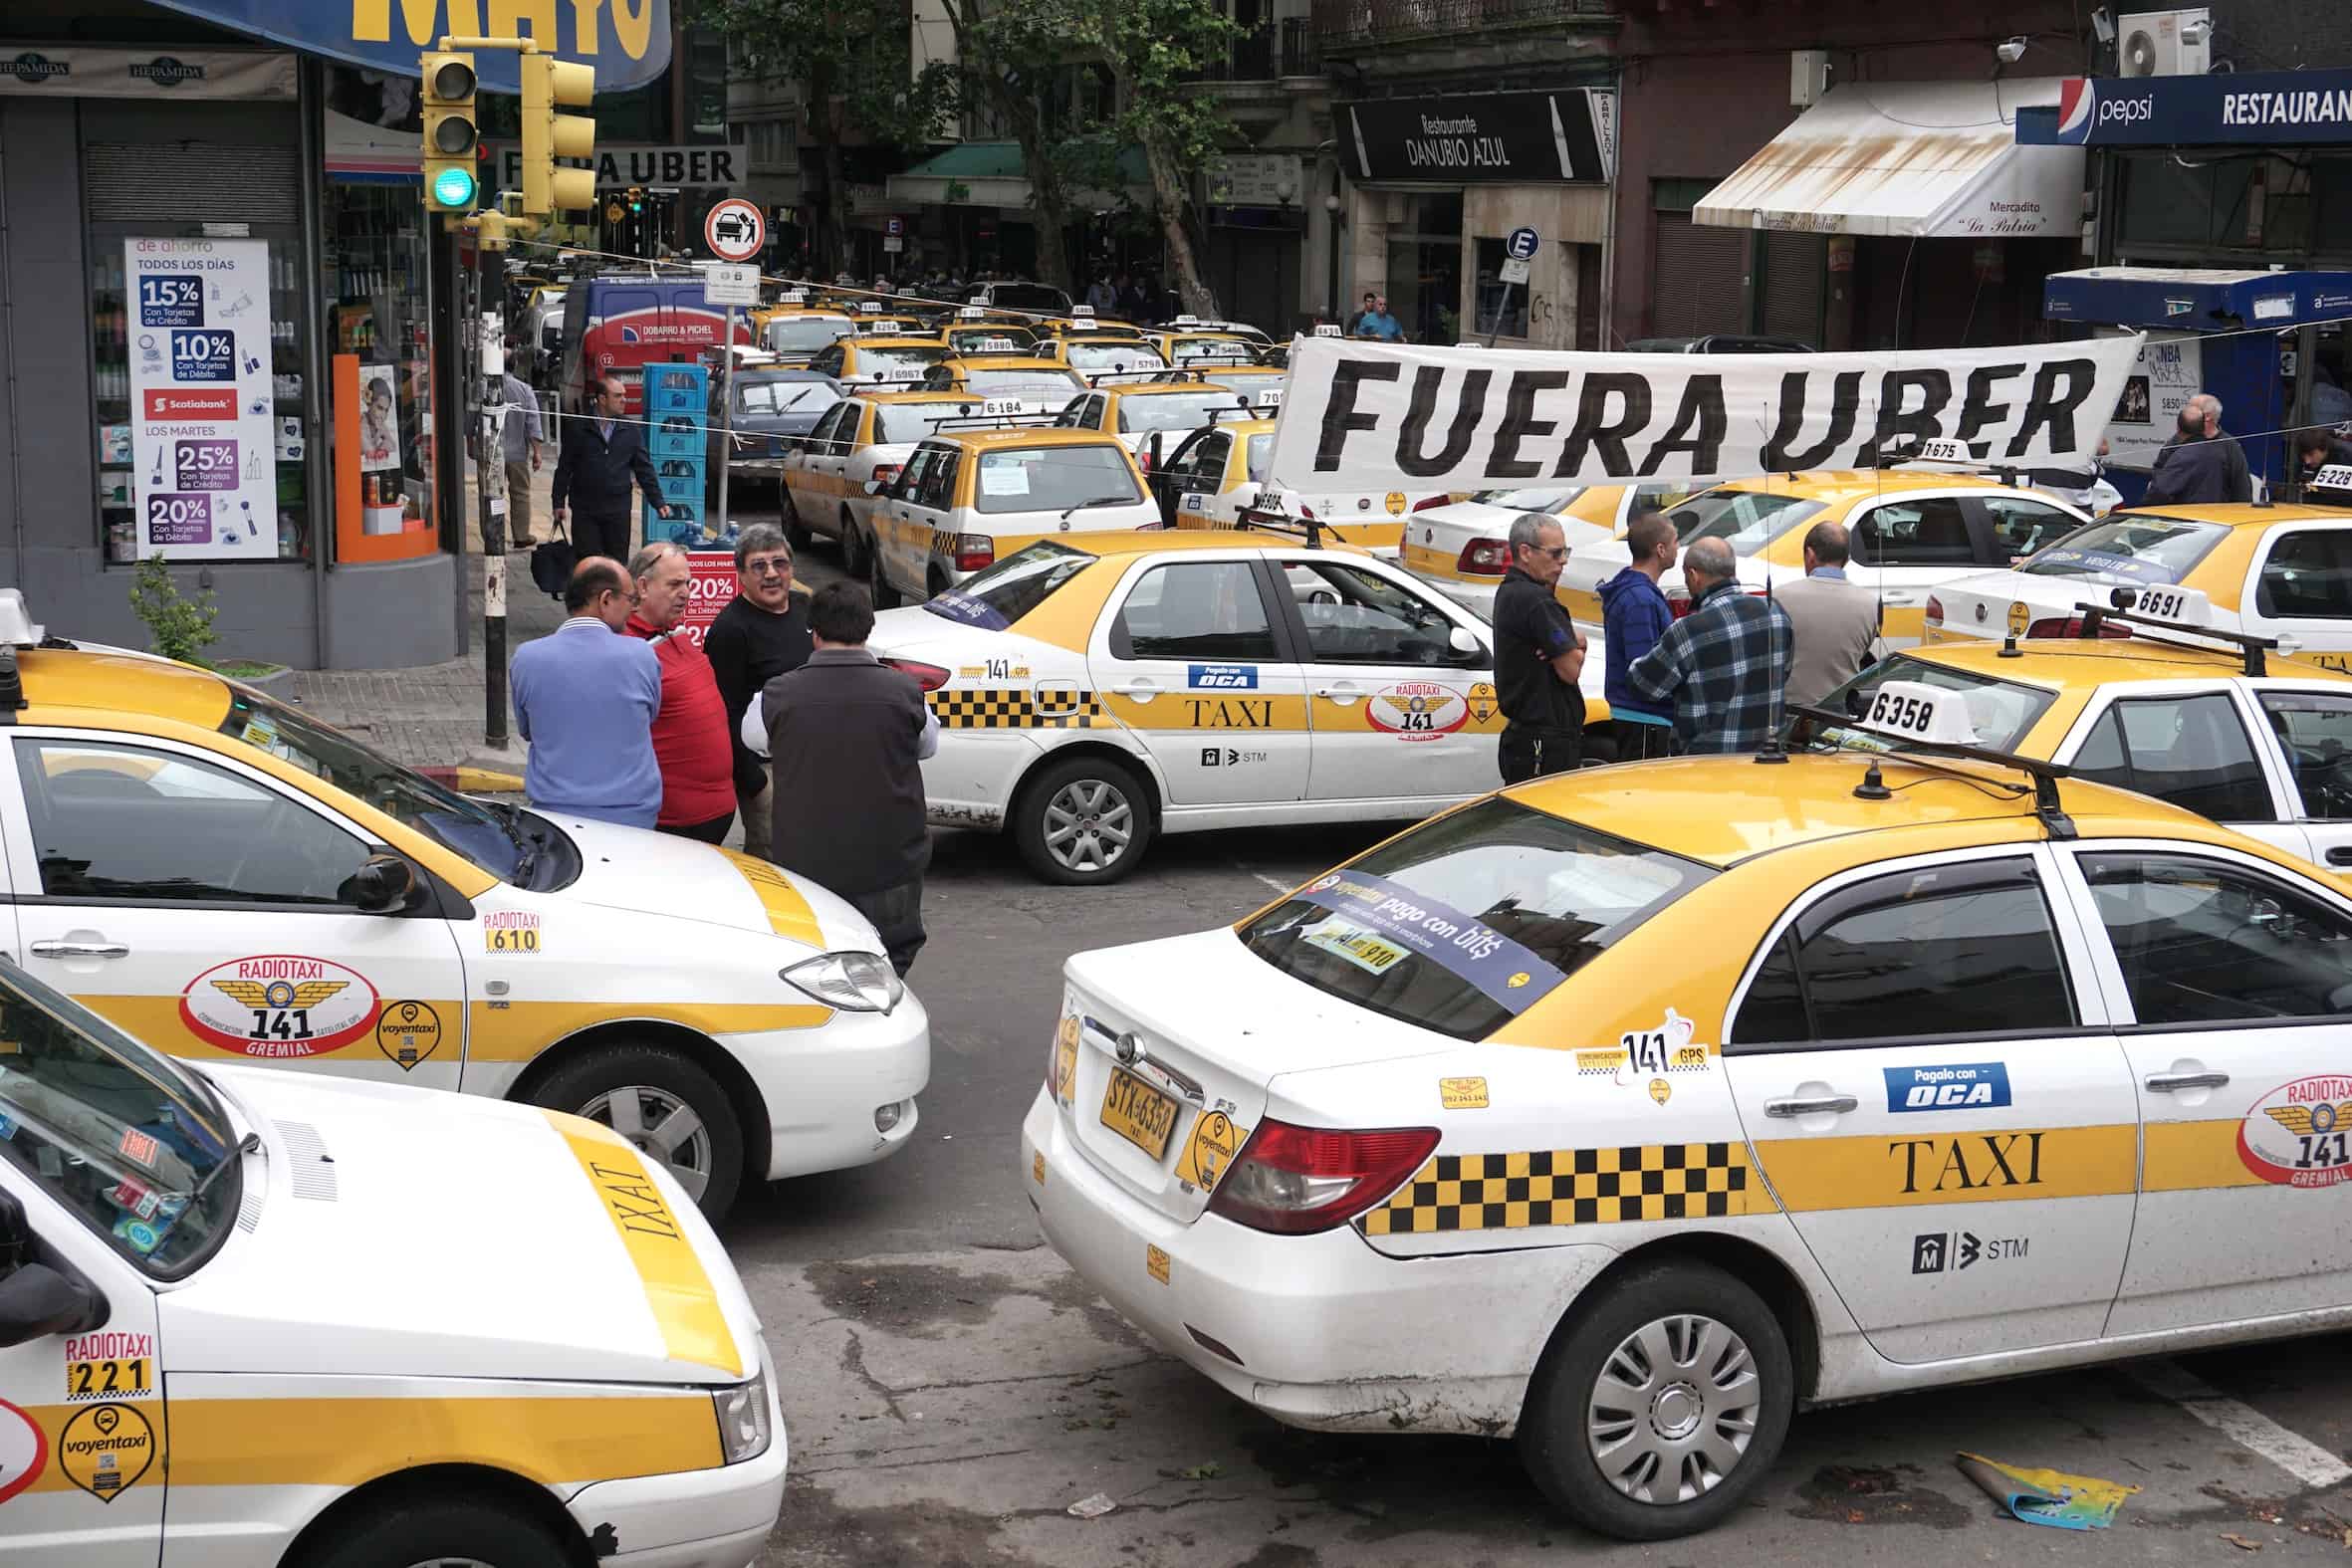 Taxi drivers in Uruguay protest Uber